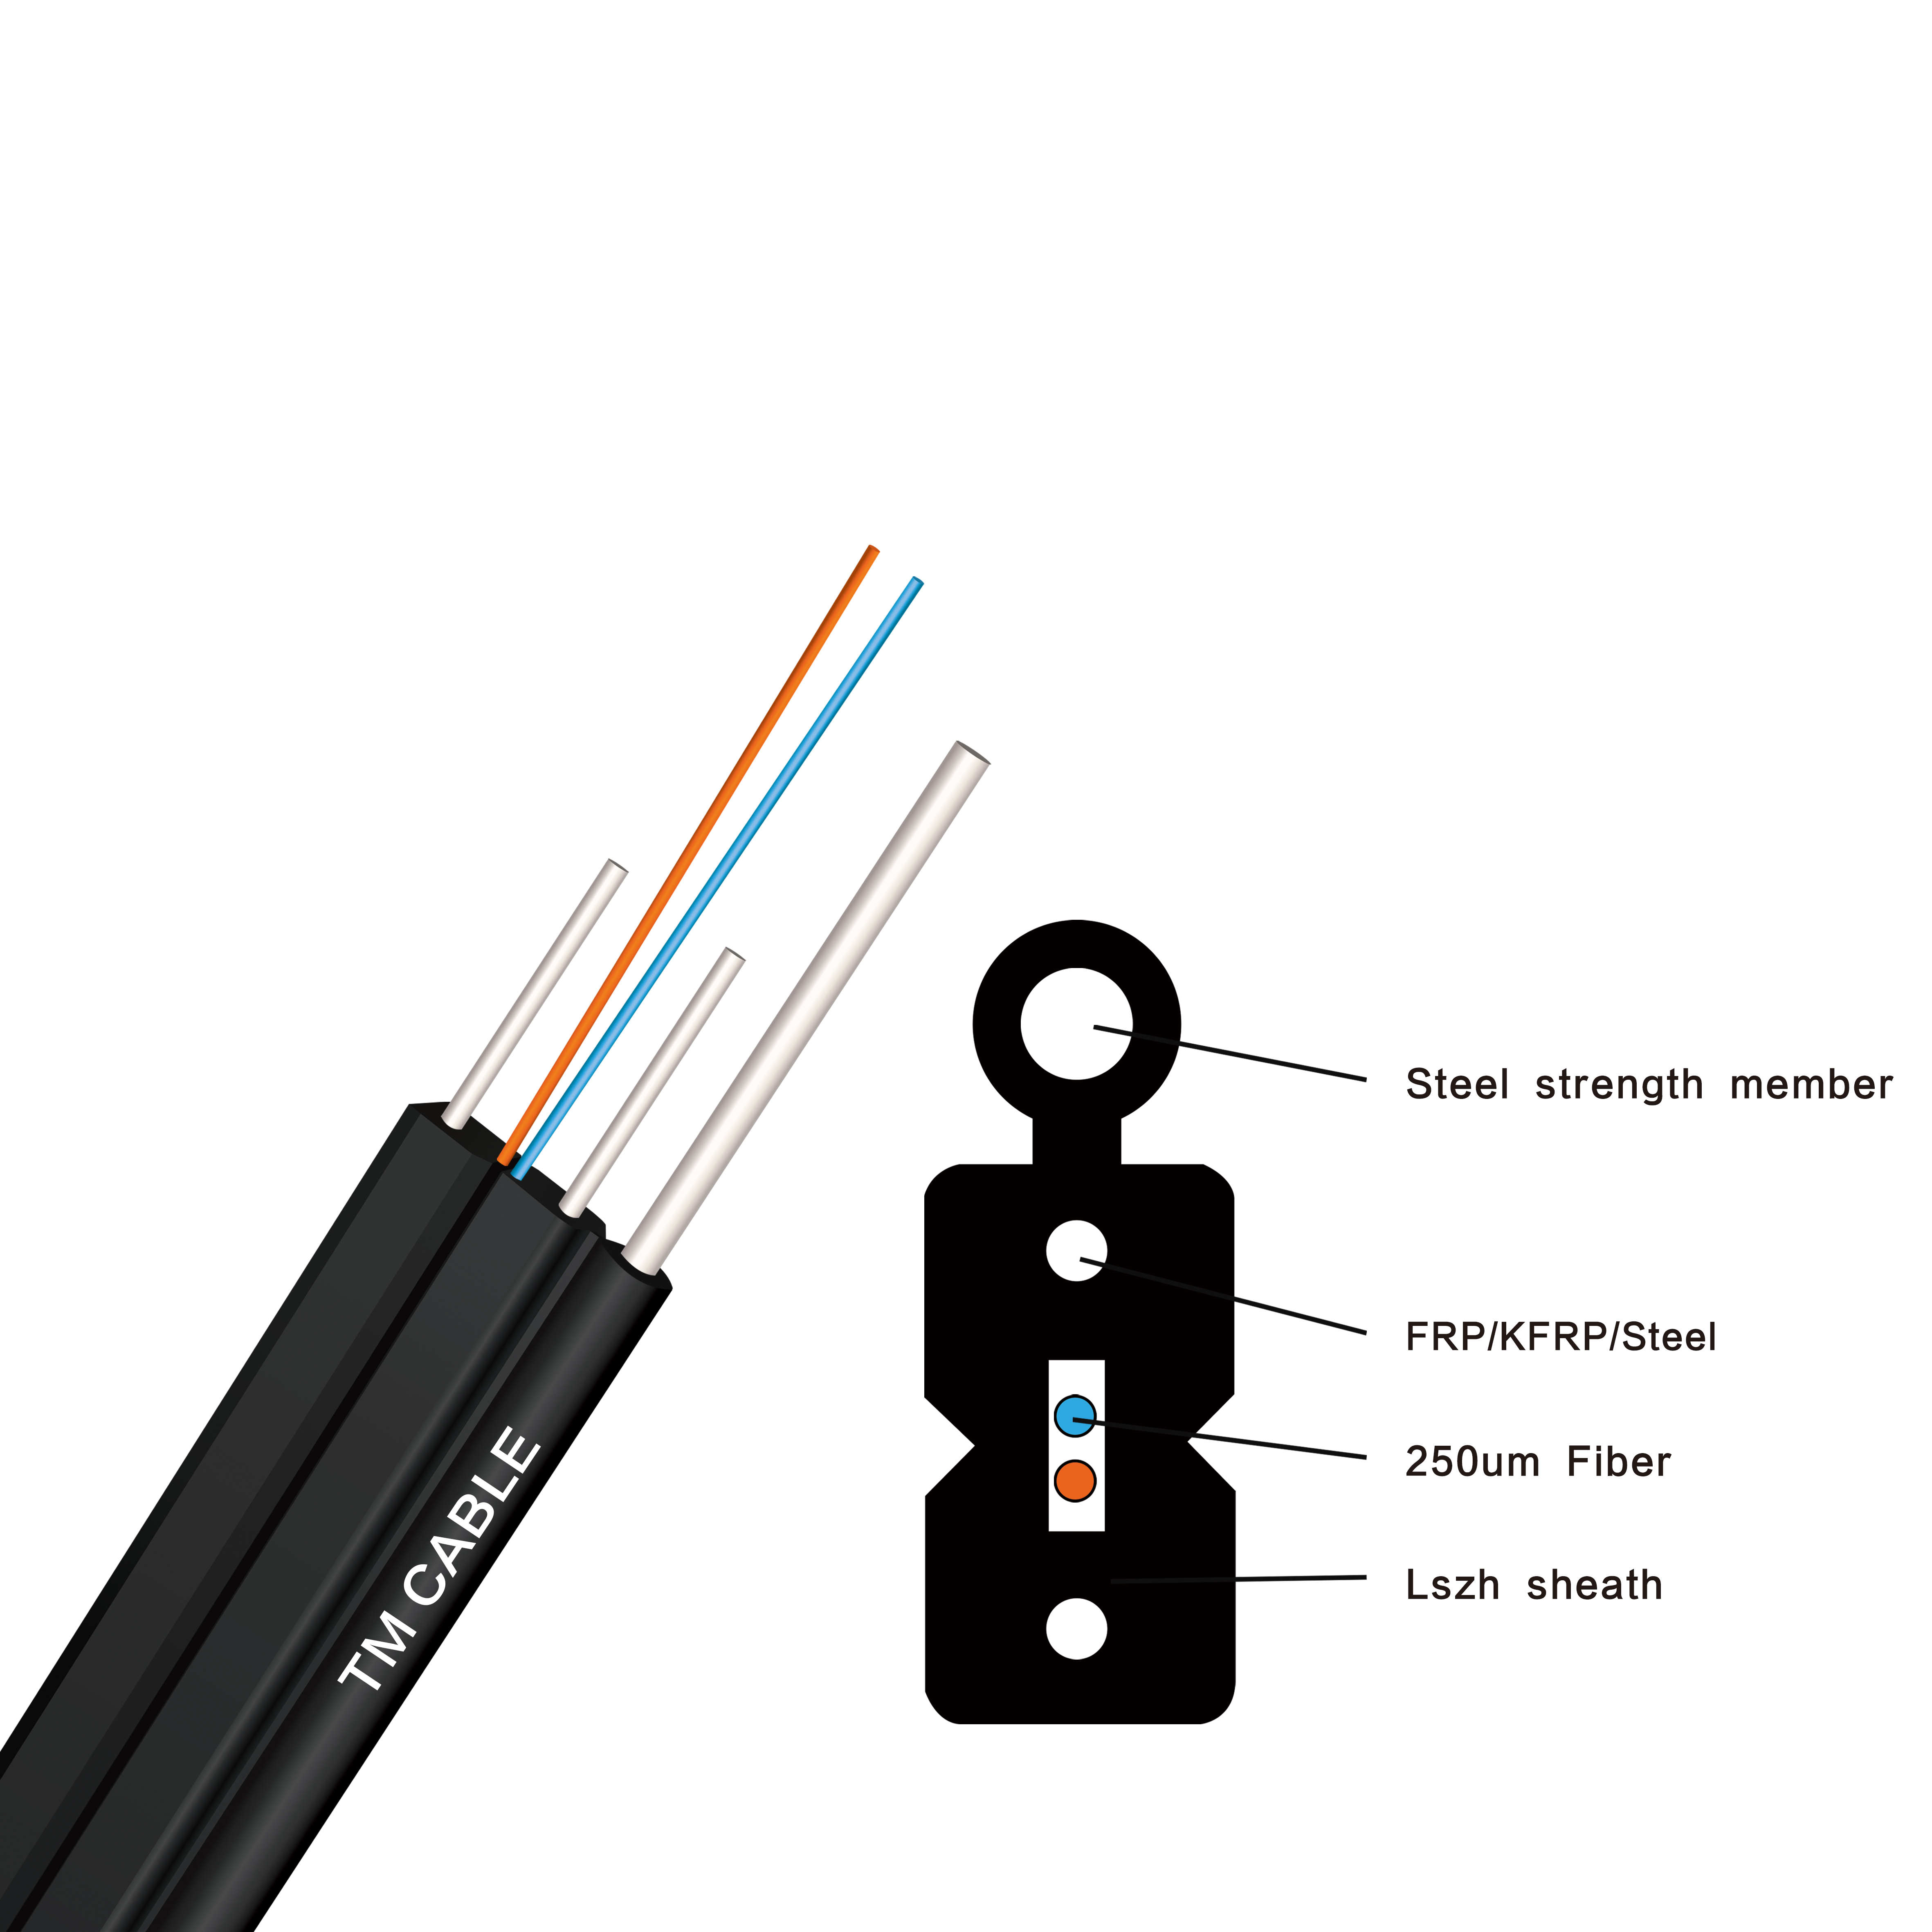 Self-Supporting Brow-Type Drop Cable GJYXCH